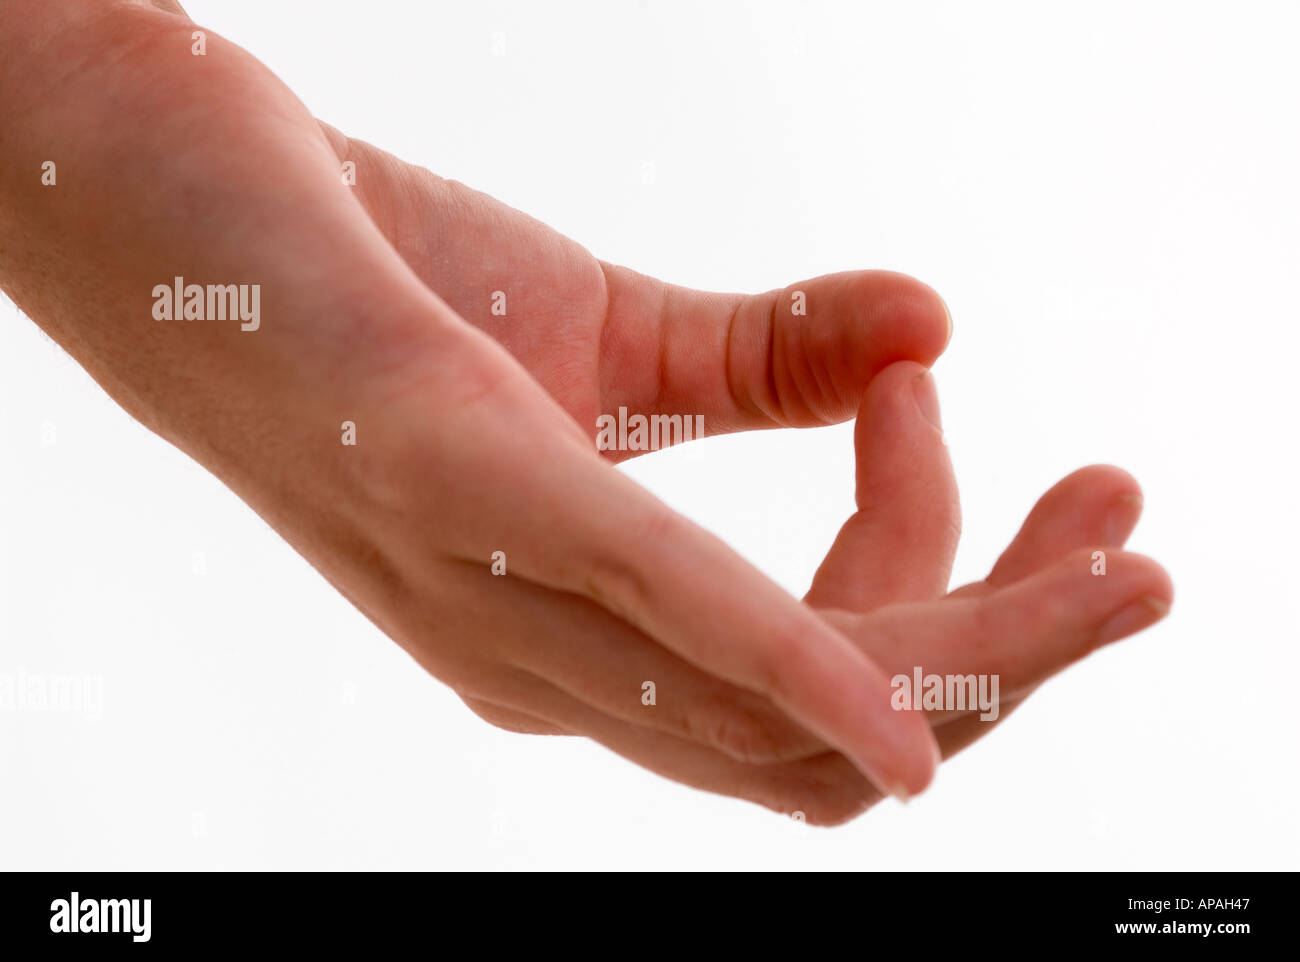 Caucasian Hand and Fingers in Position for Yoga Meditation USA Stock Photo